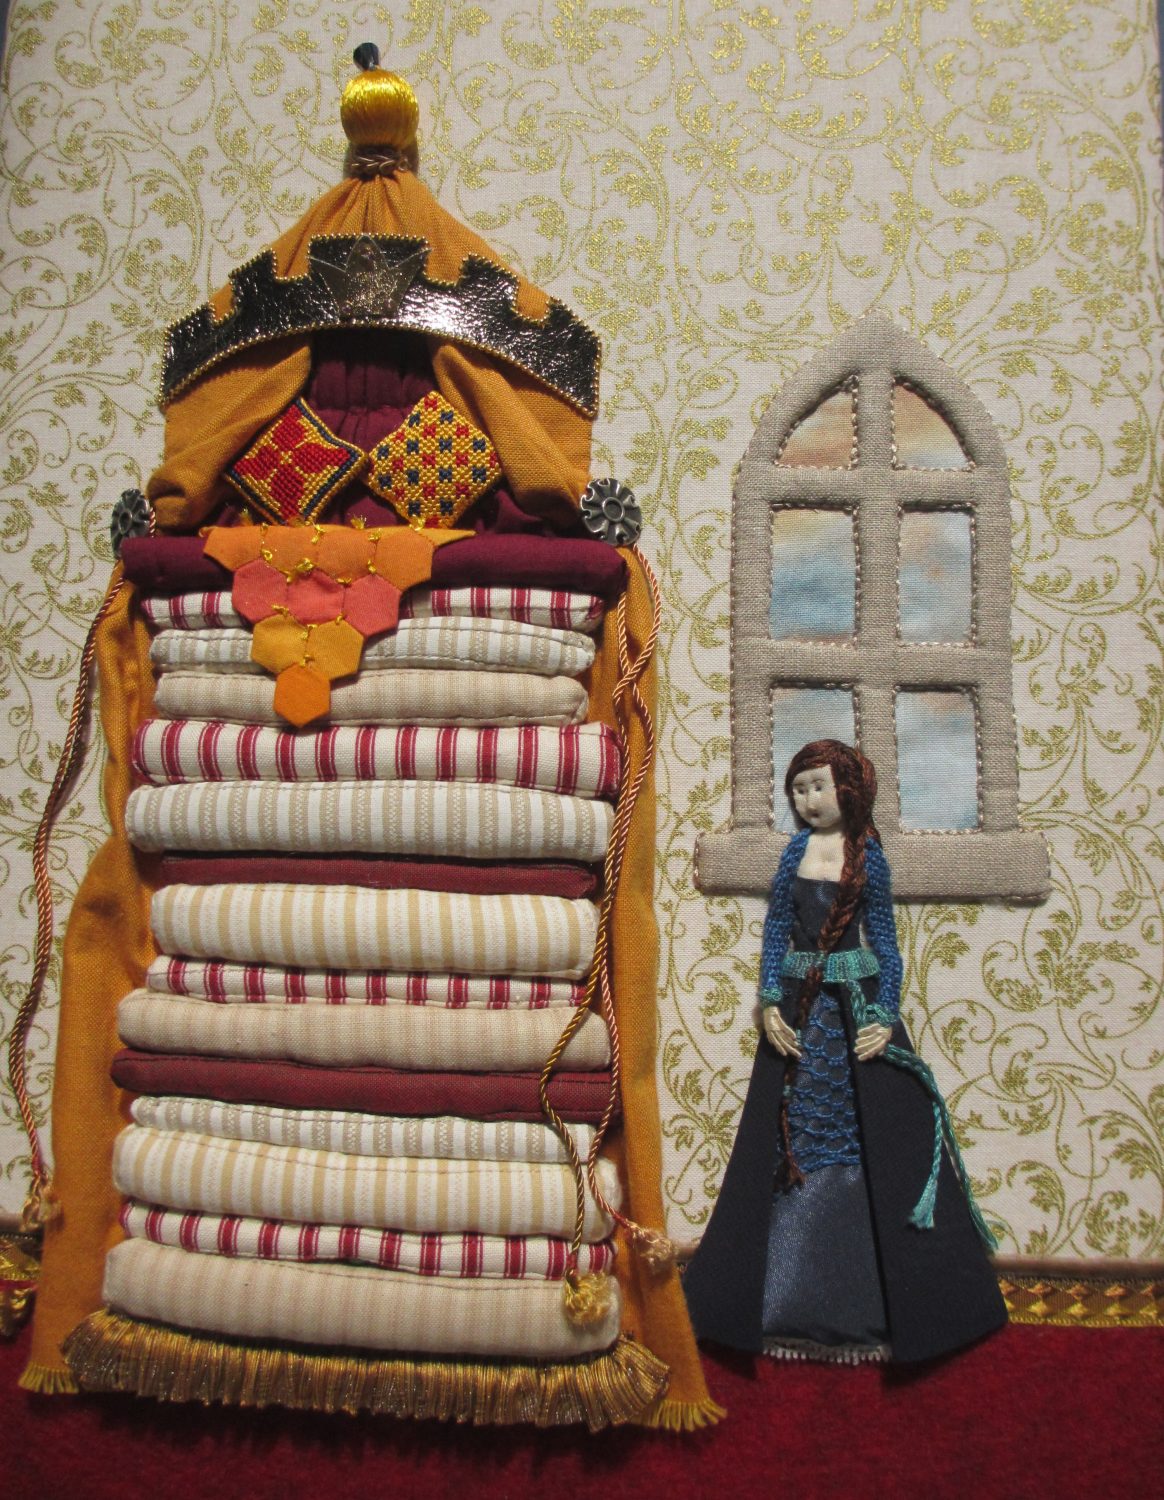 Stories in Stitch Exhibition Coming Soon at the Royal School of Needlework